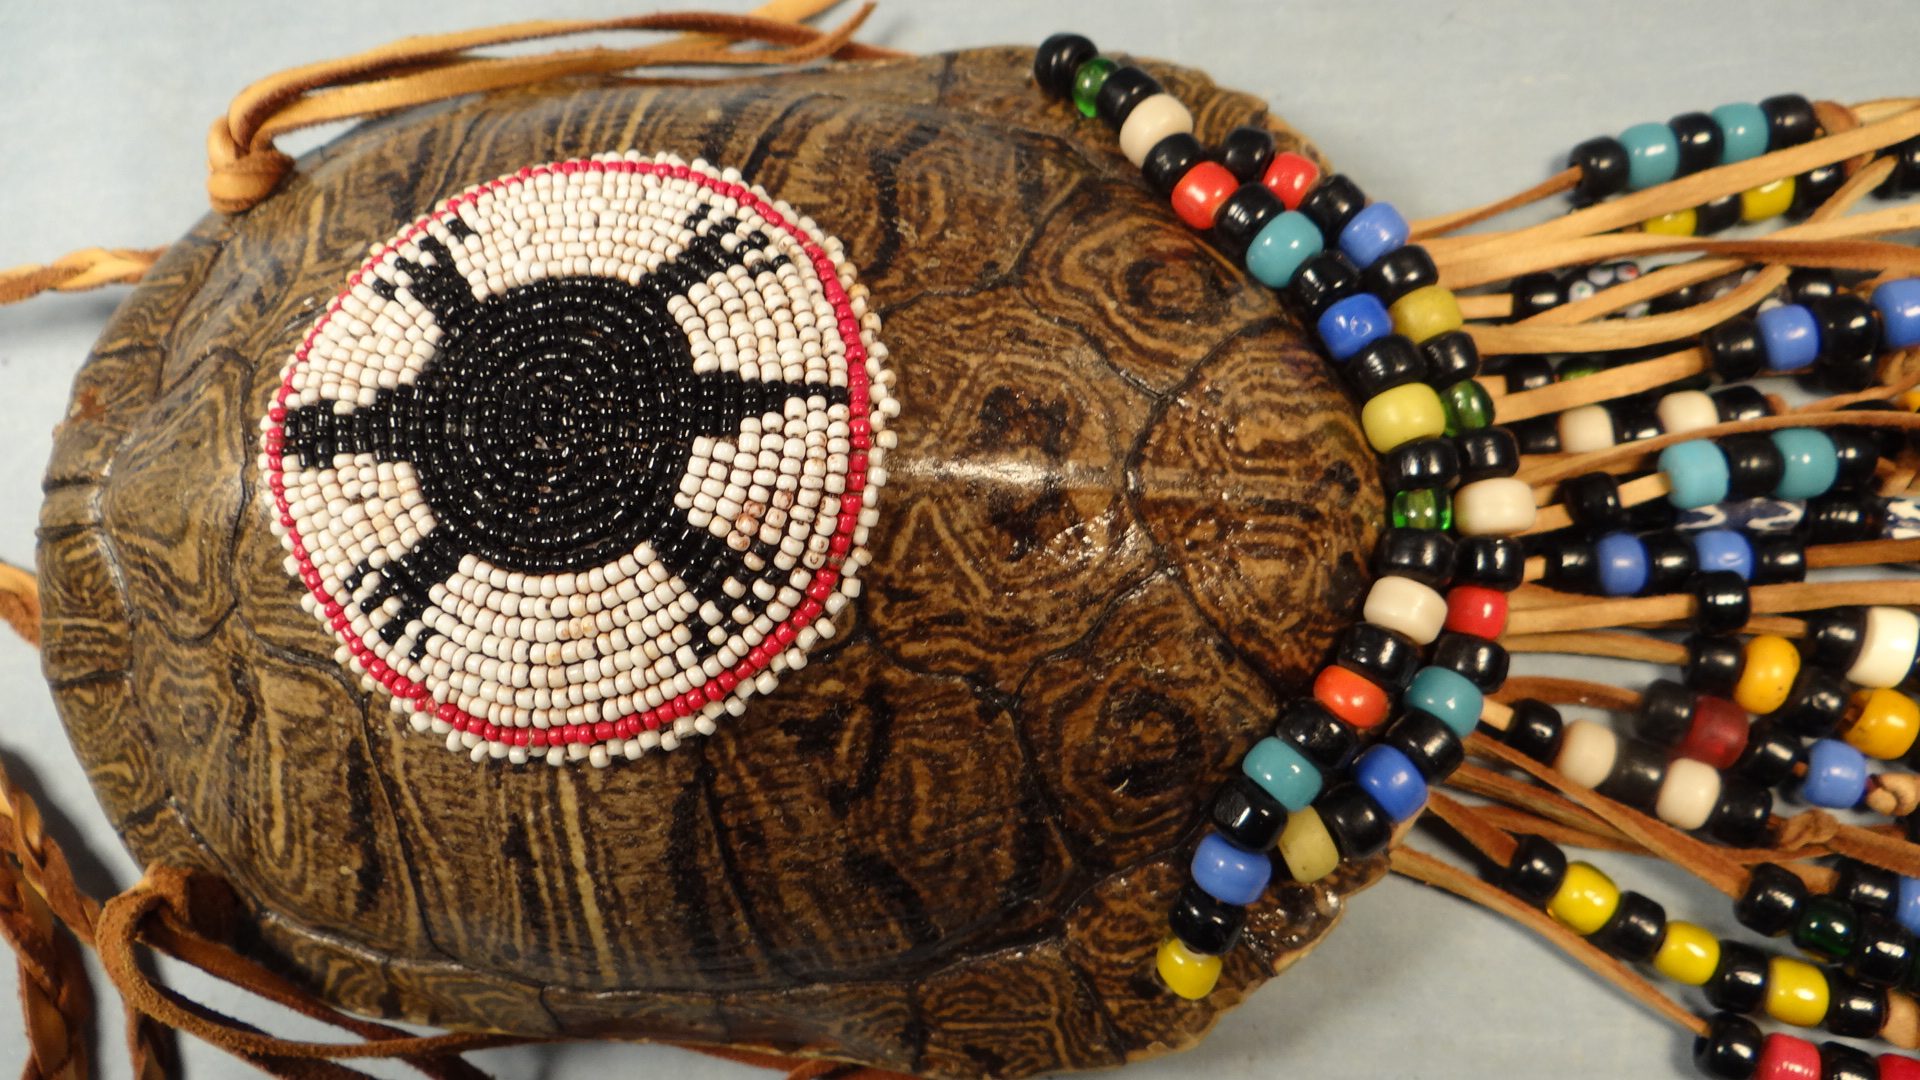 Native American turtle shell neck bag purse possibles mountain man regalia  | Turtle shell, Purses and bags, Turtle crafts